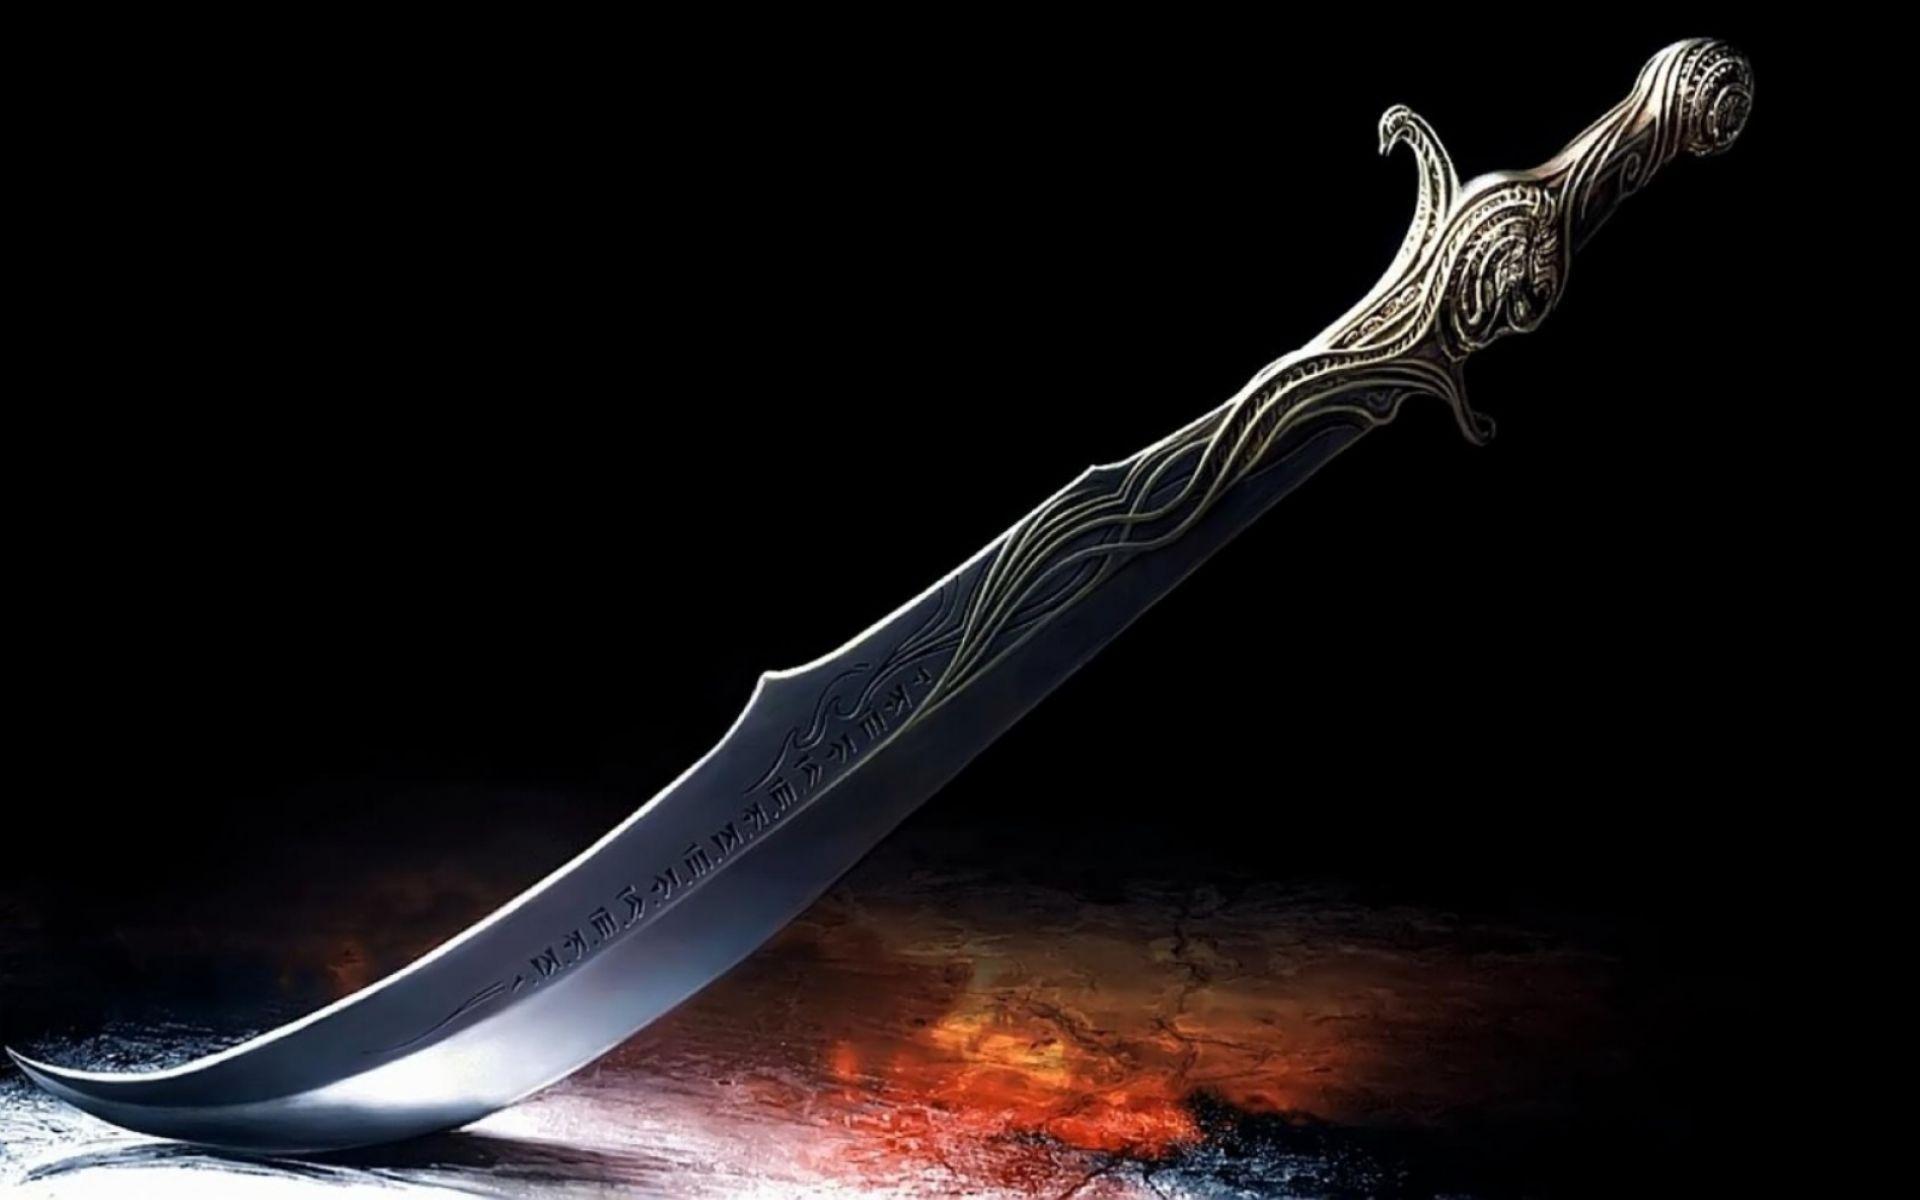 3D Hindu Sword With Fire Wallpaper. HD 3D and Abstract Wallpaper